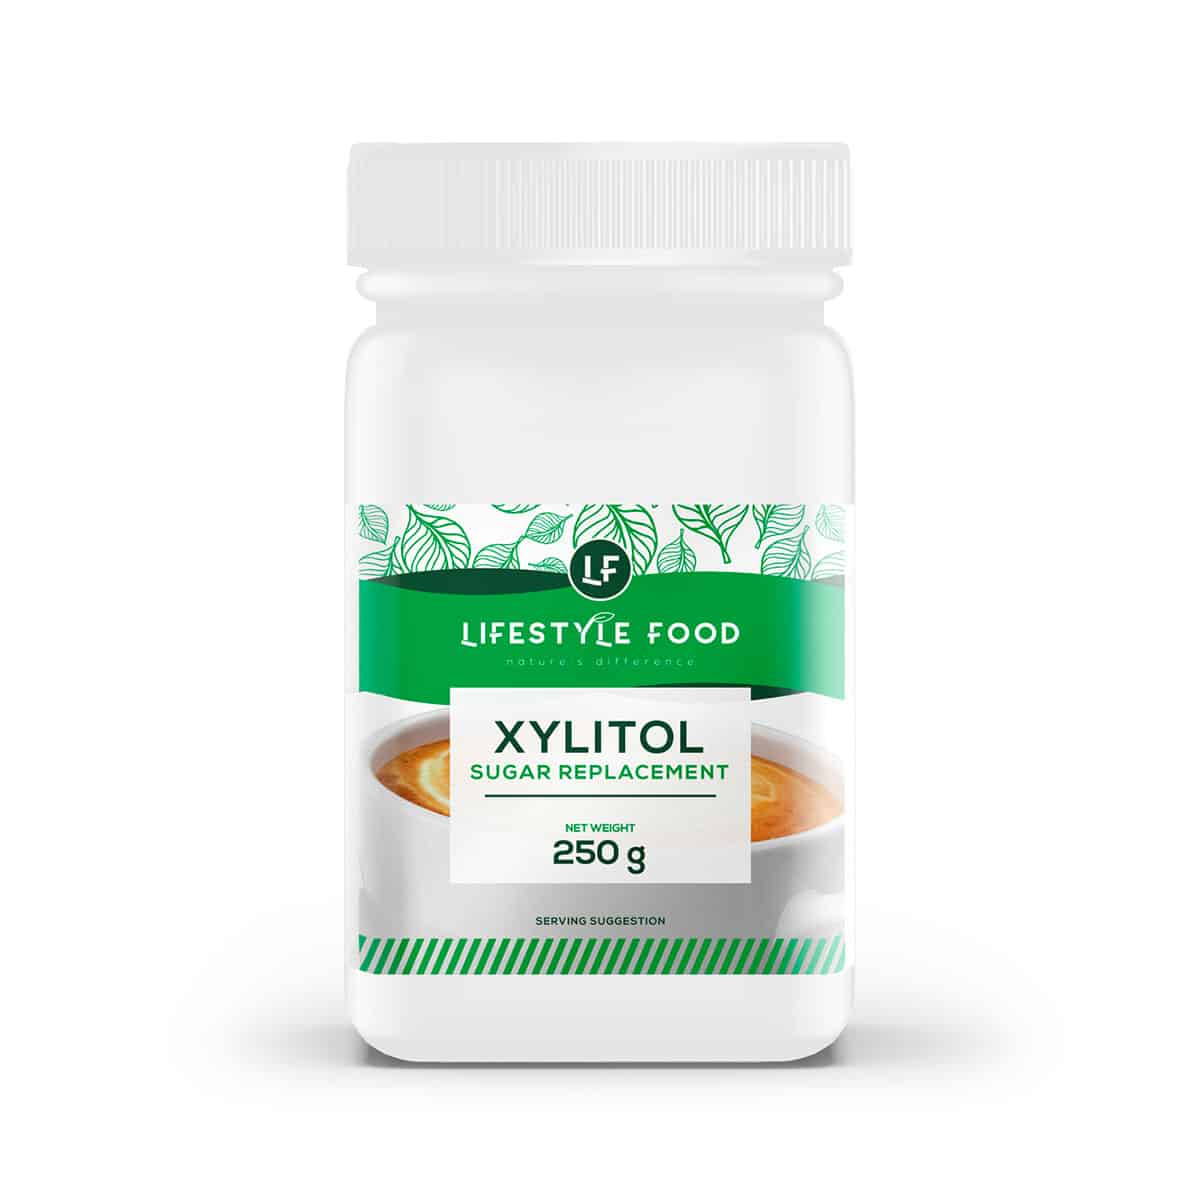 Lifestyle Food Xylitol Sugar Replacement - 250g